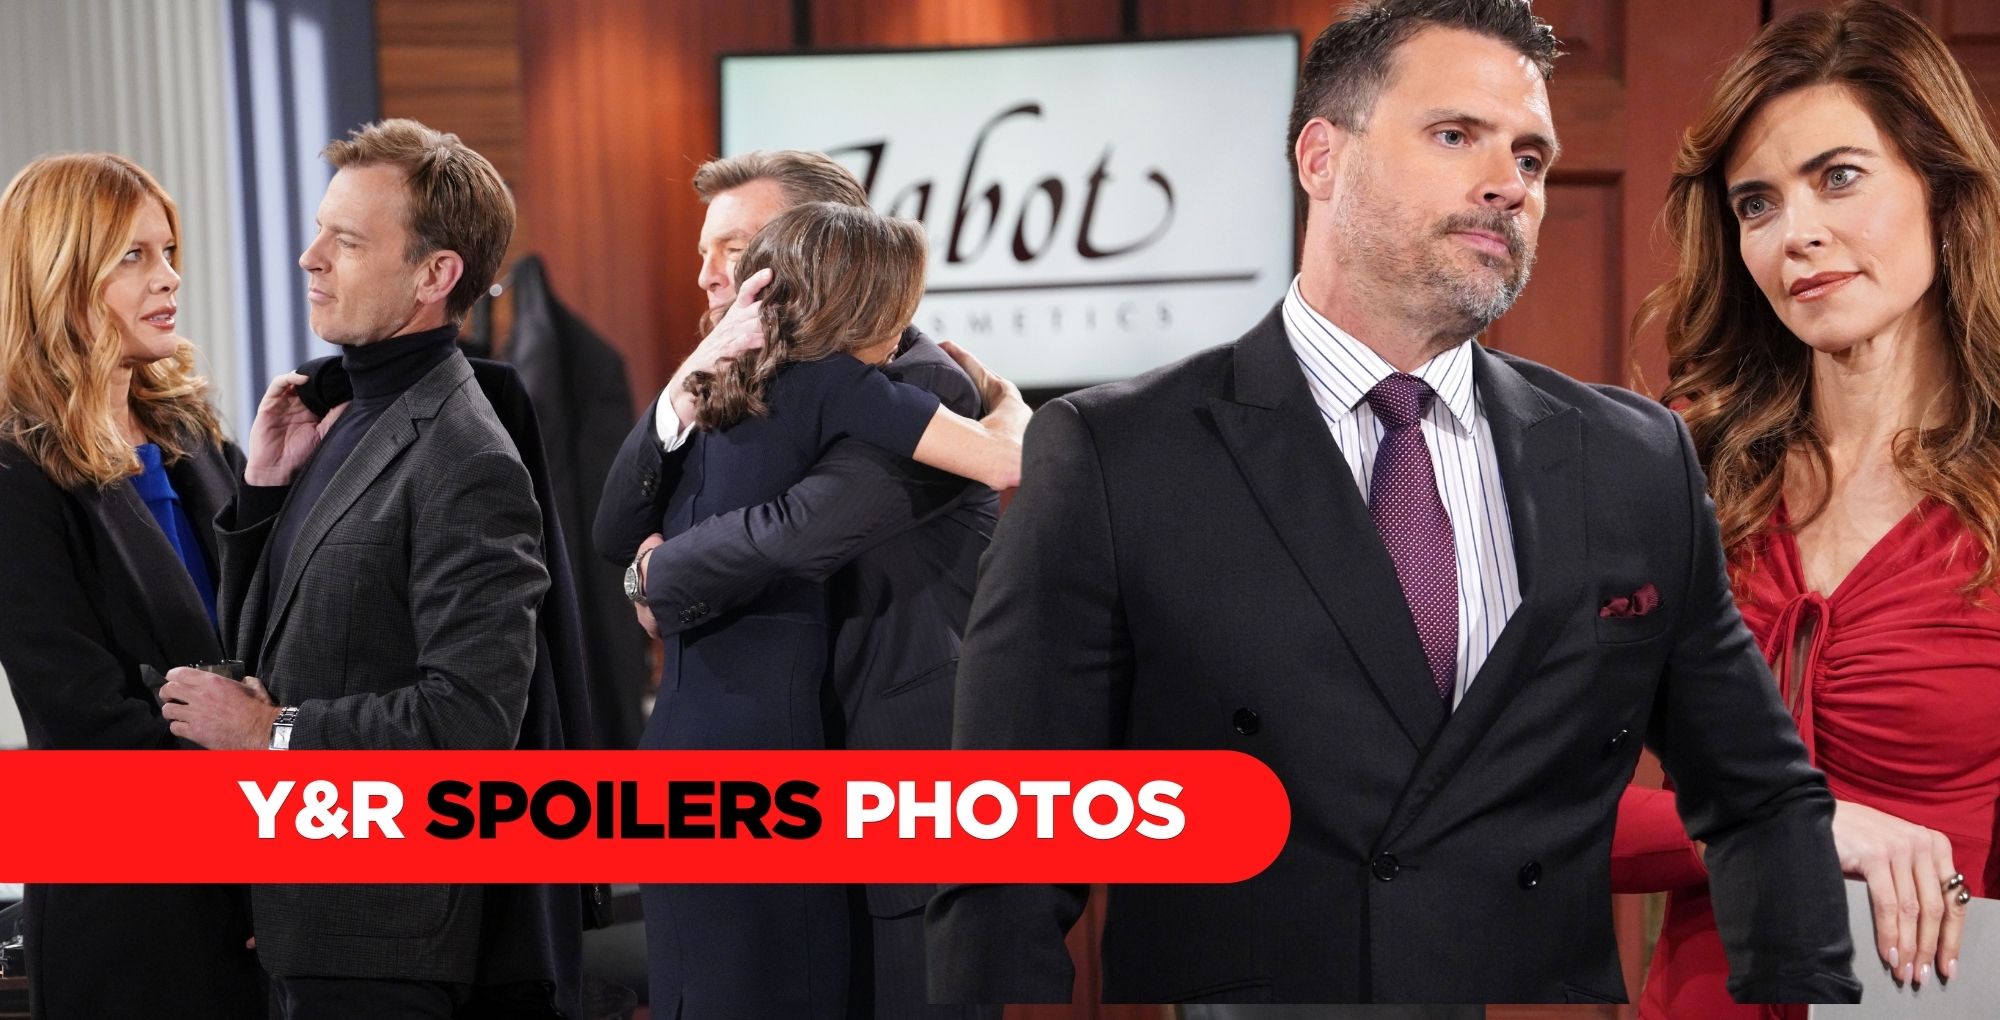 y&r spoilers photos collage with phyllis, tucker, jack, diane, nick, and victoria